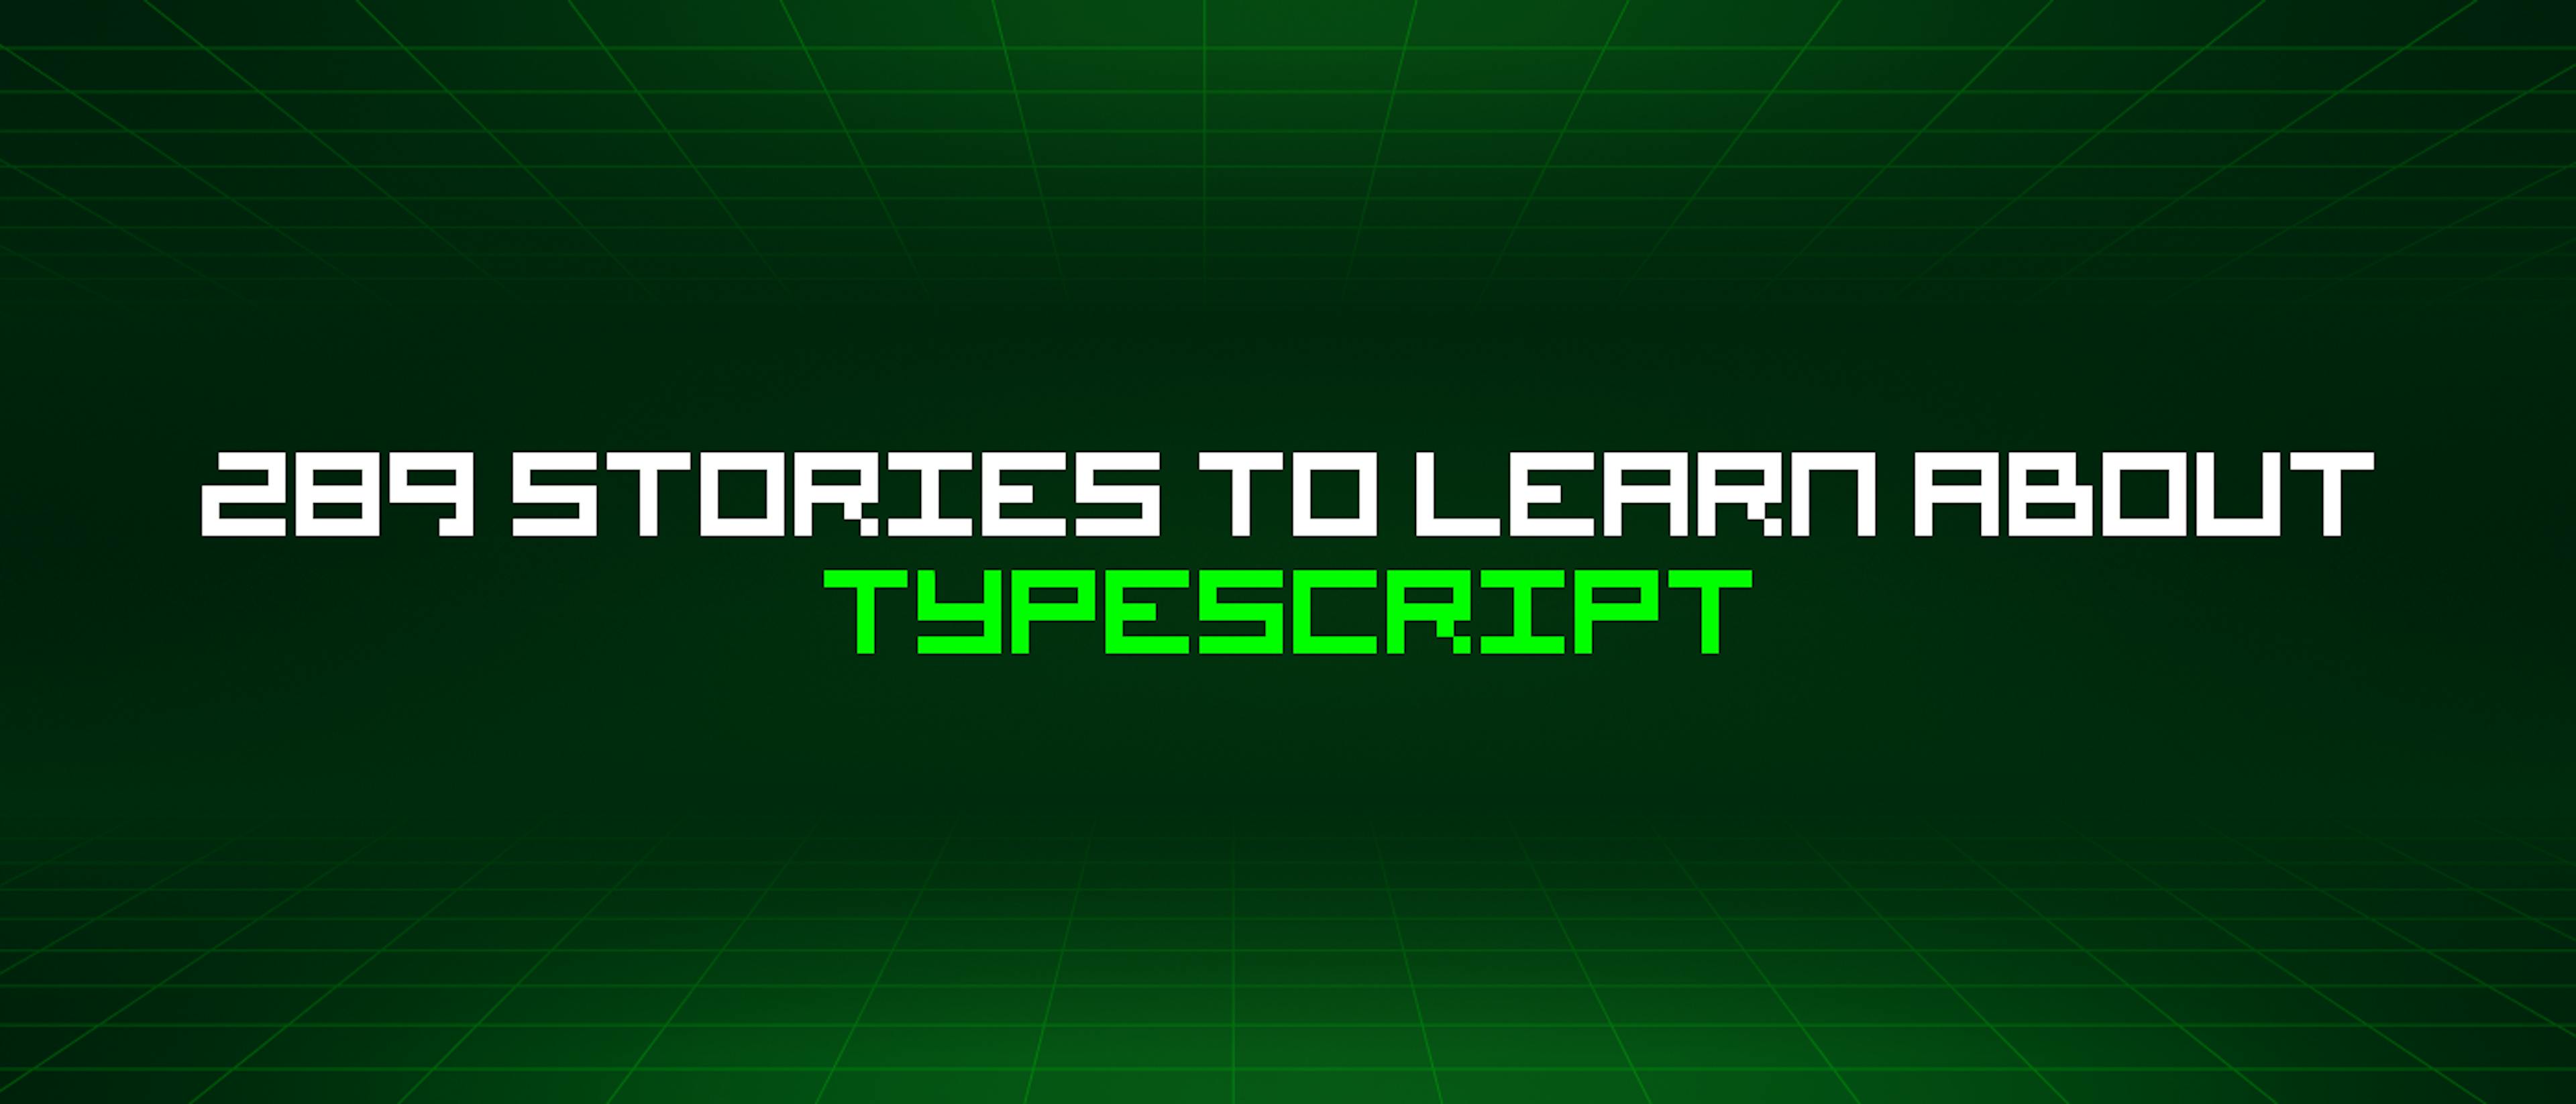 featured image - 289 Stories To Learn About Typescript